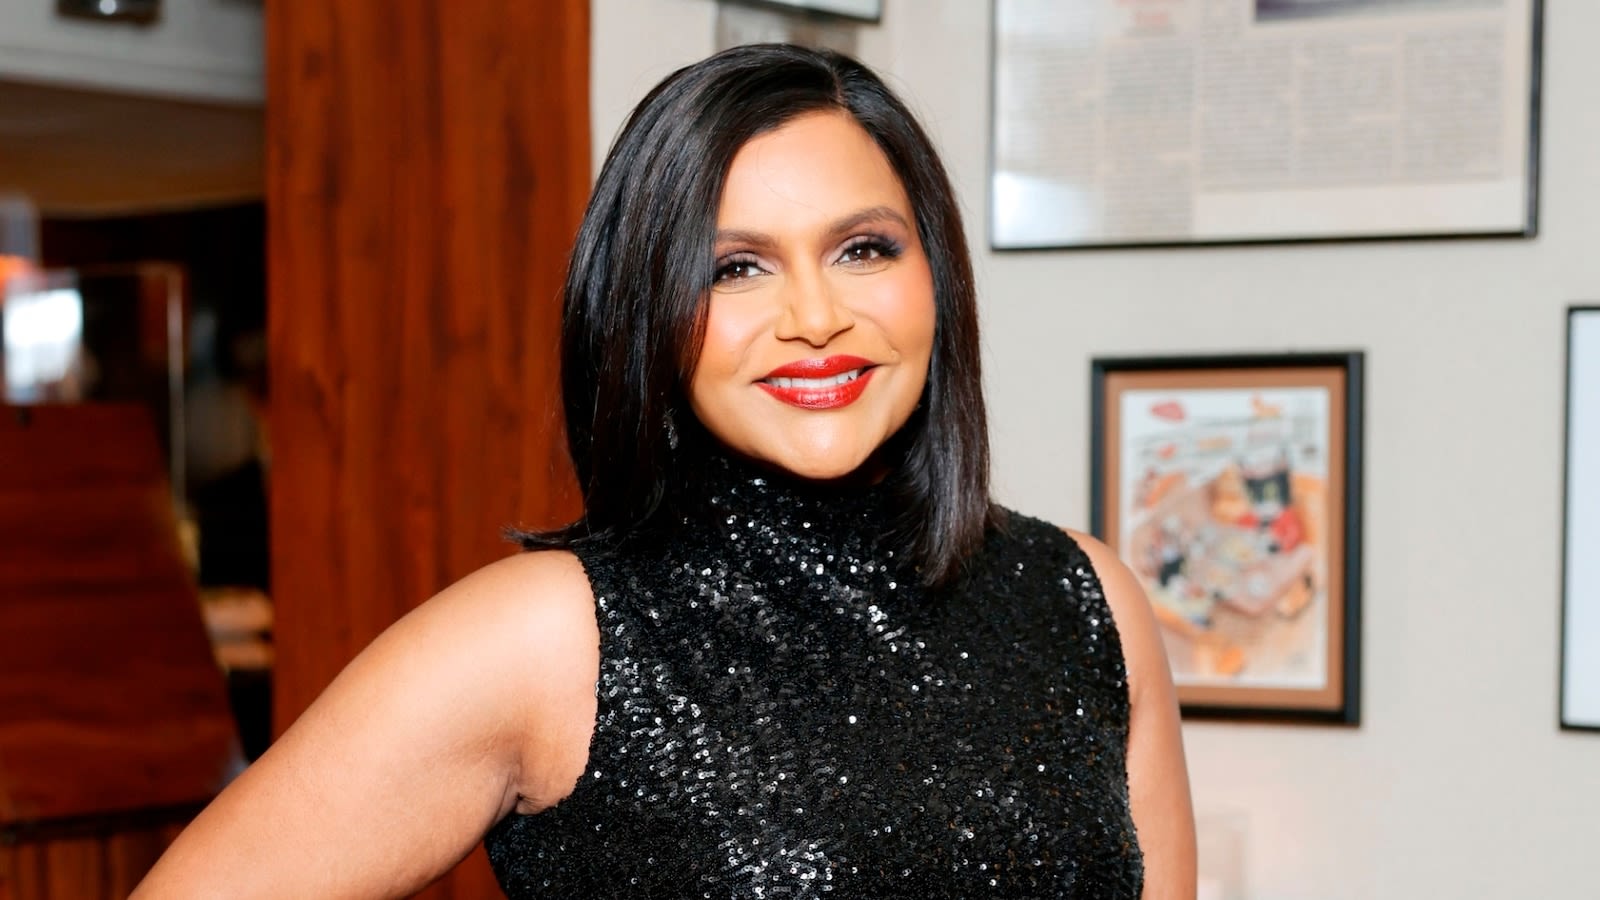 Mindy Kaling shares sweet new photo of daughter Anne